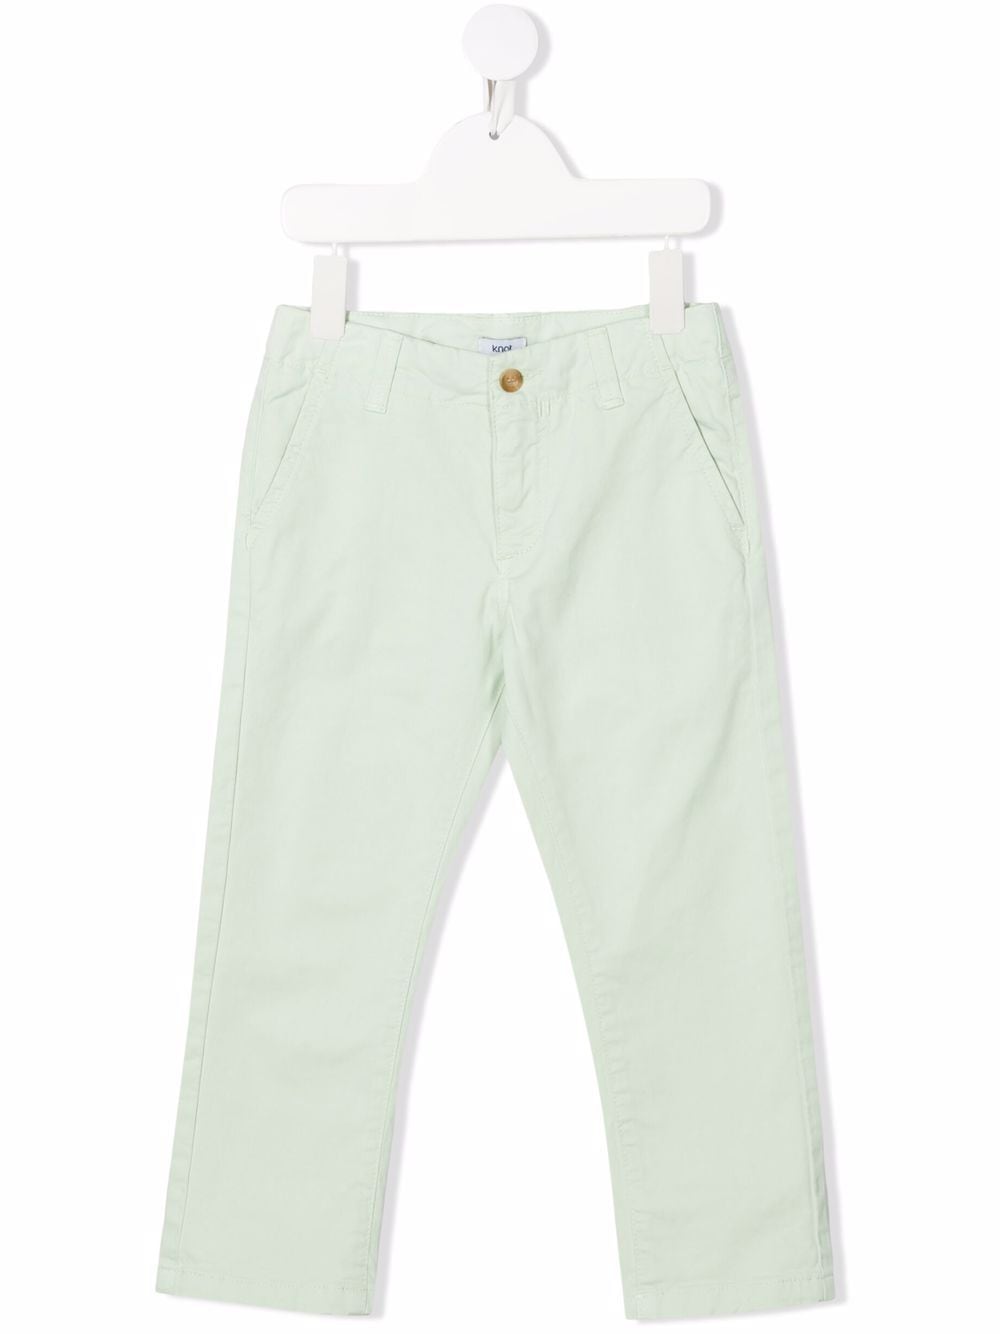 Image 1 of Knot James cotton twill trousers